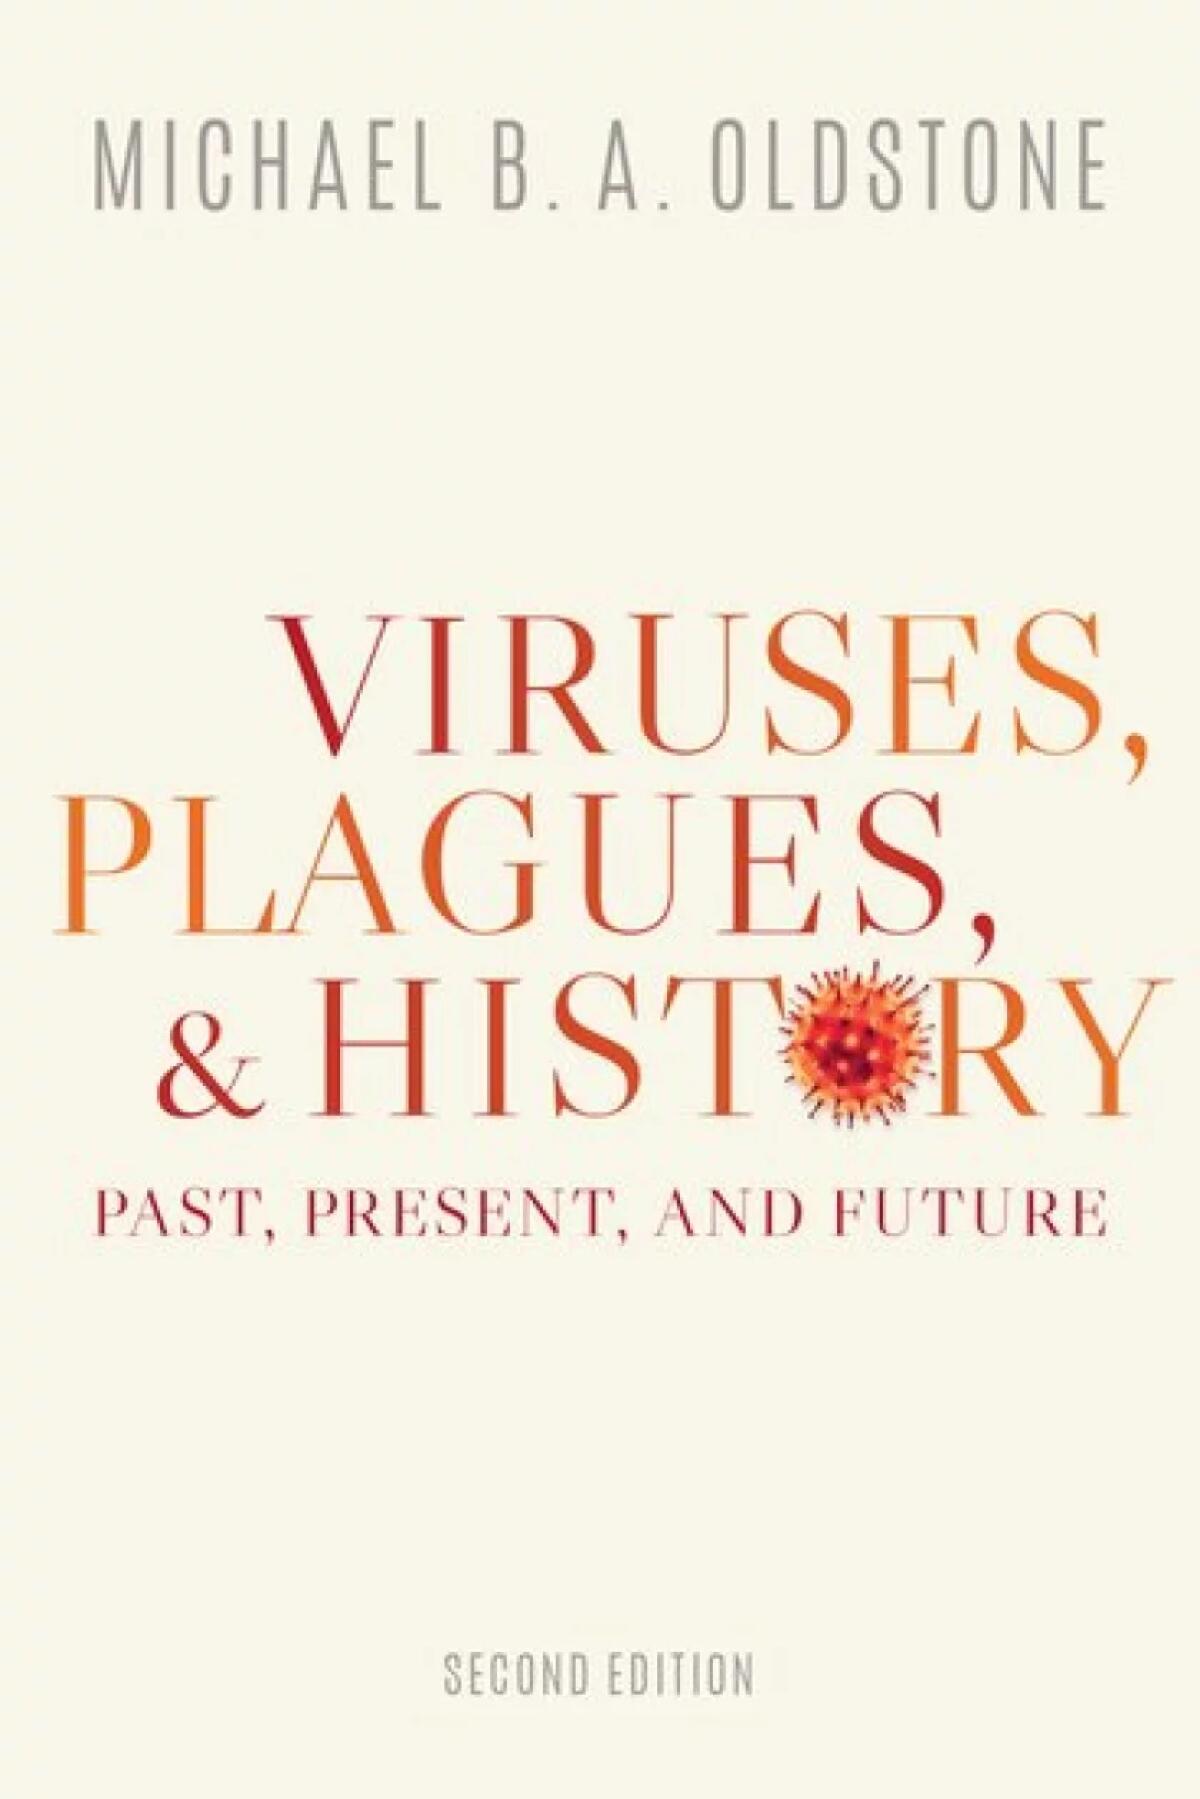 Dr. Michael Oldstone’s book, updated in 2020, draws parallels between the coronavirus pandemic and health crises of the past.